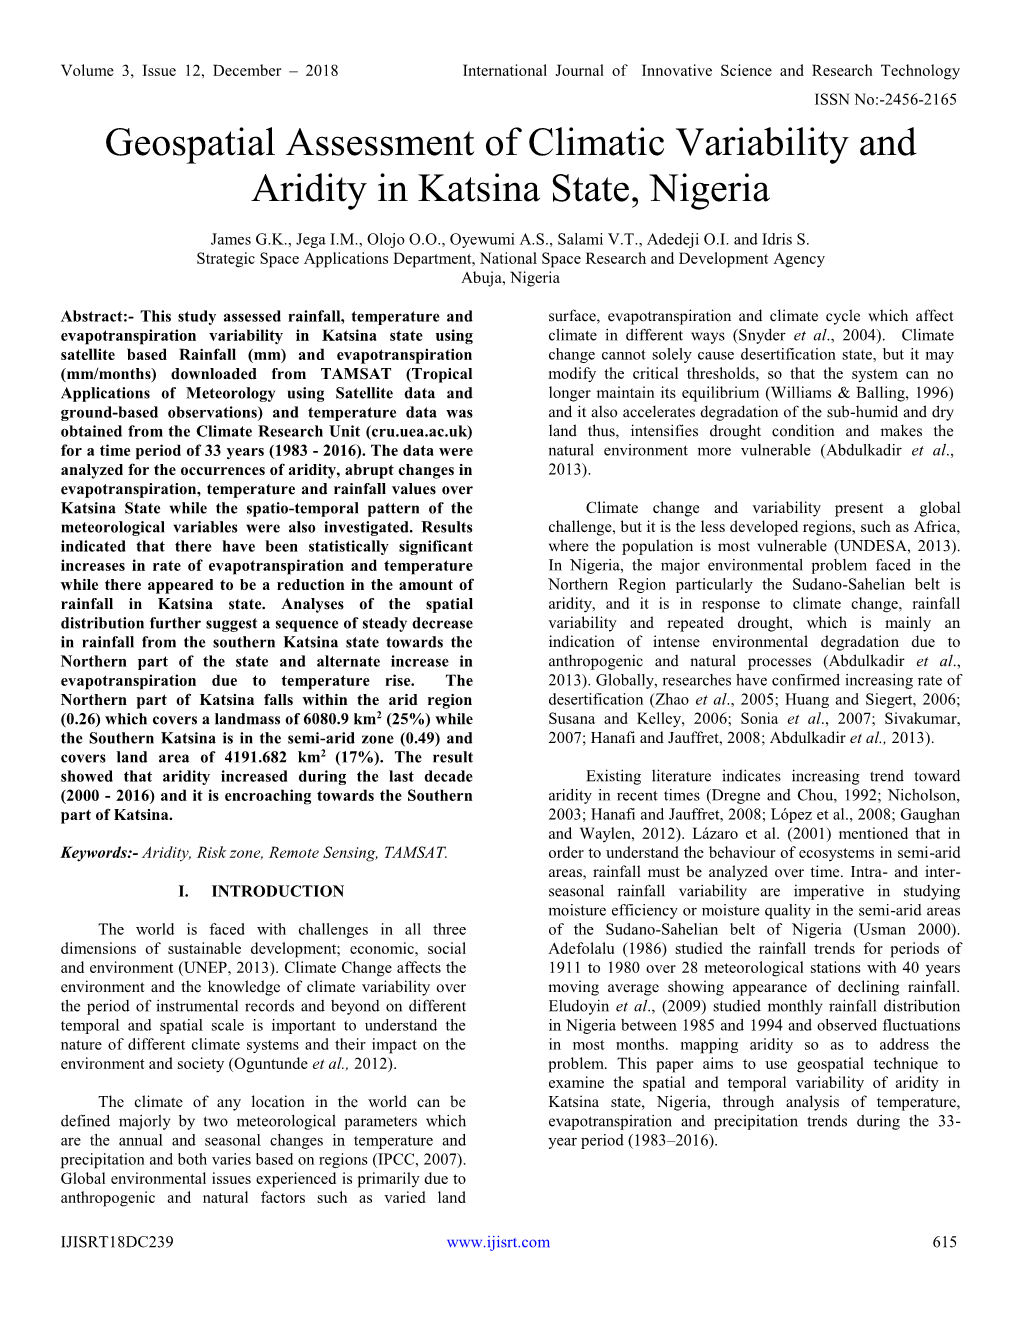 Geospatial Assessment of Climatic Variability and Aridity in Katsina State, Nigeria